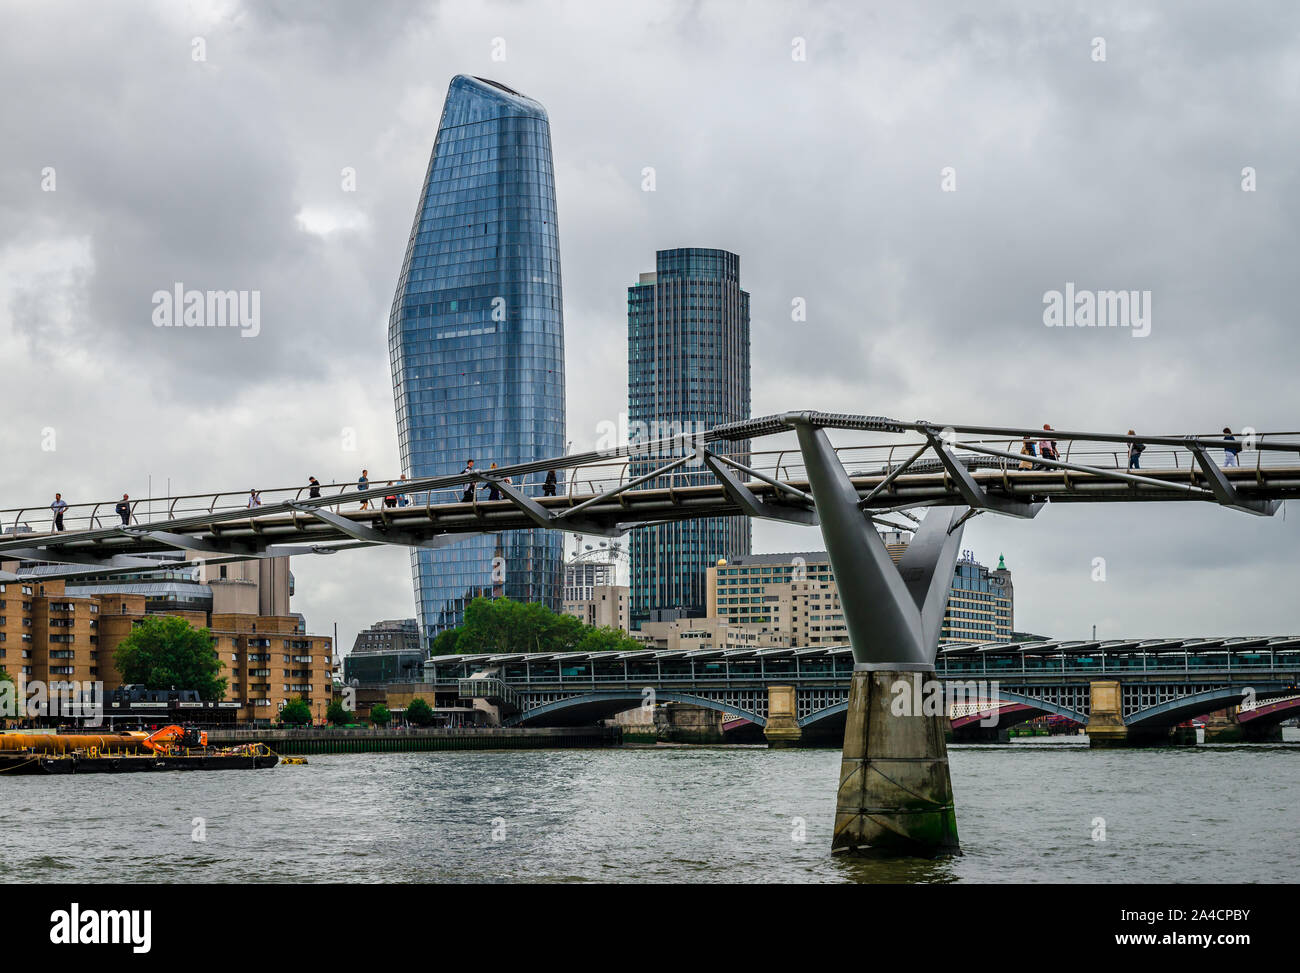 People walk on the Millennium Bridge that spans river Thames, in London. One Blackfriars Tower (aka The Vase) & South Bank Tower are in the background Stock Photo